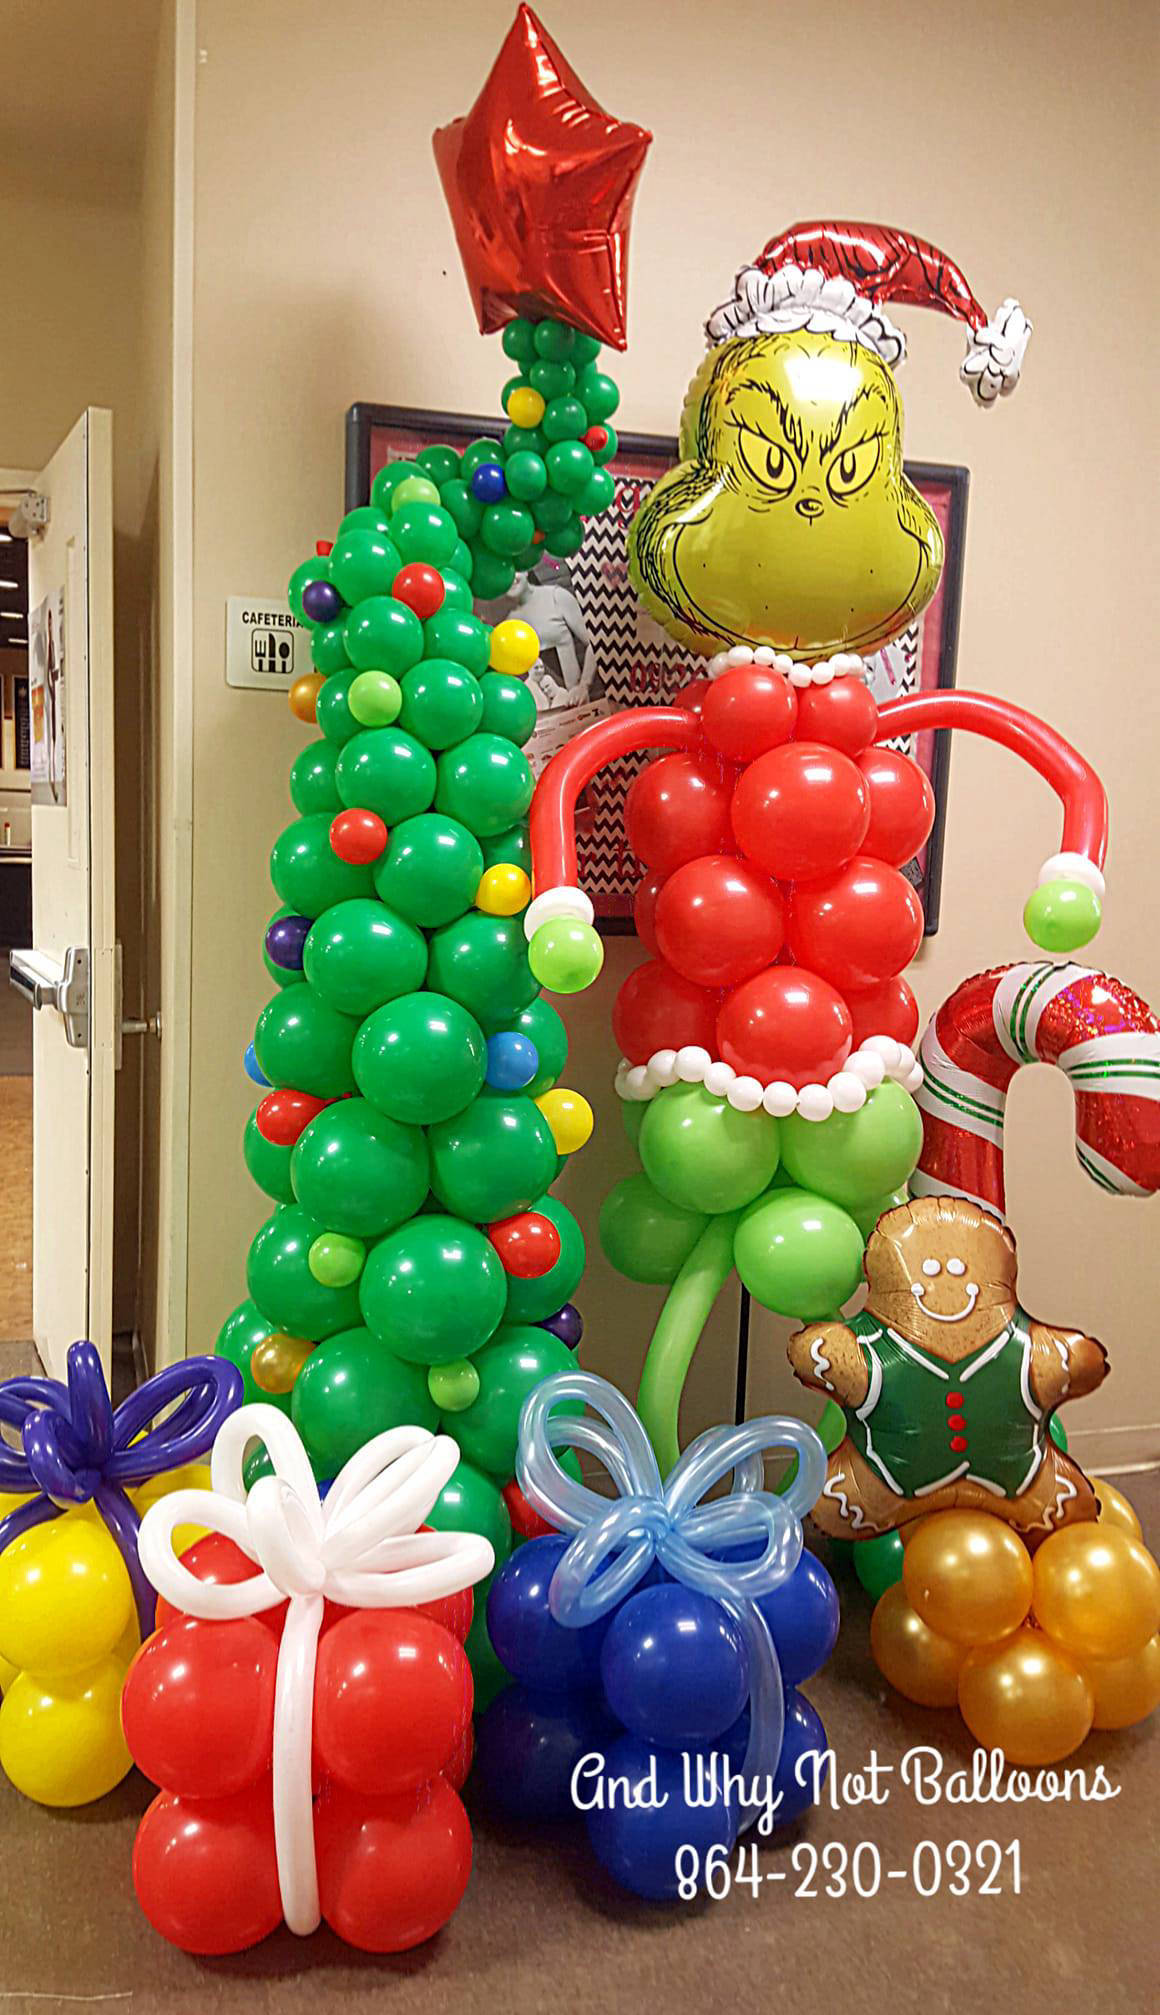 greenville sc custom balloon christmas grinch character and why not balloons